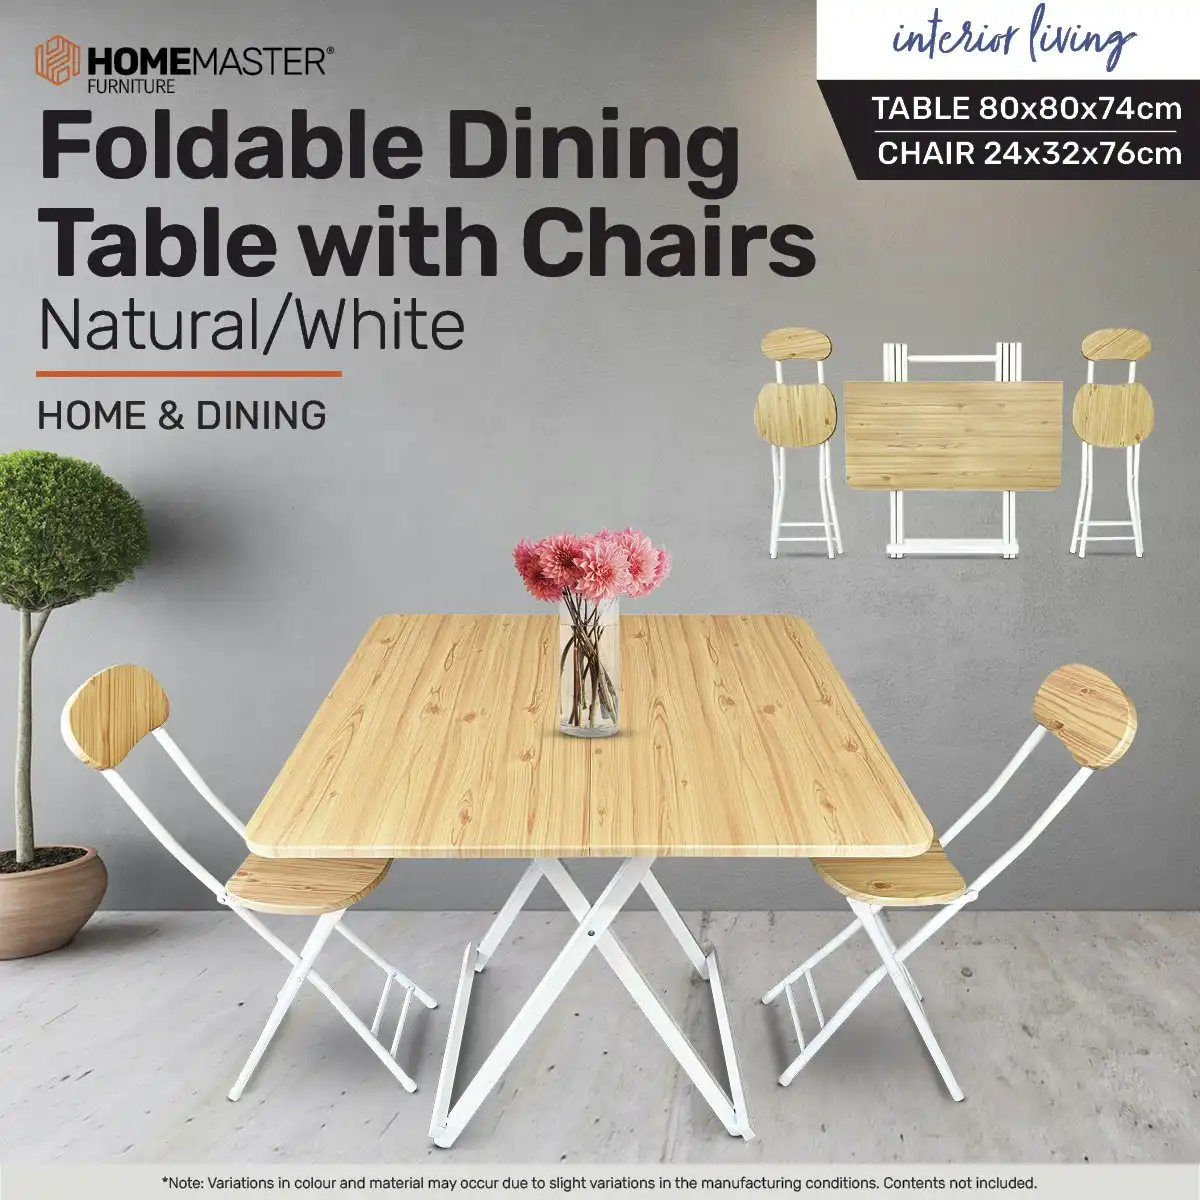 Home Master Foldable Dining Table & Chairs Indoor/Outdoor Sturdy 74 x 80cm